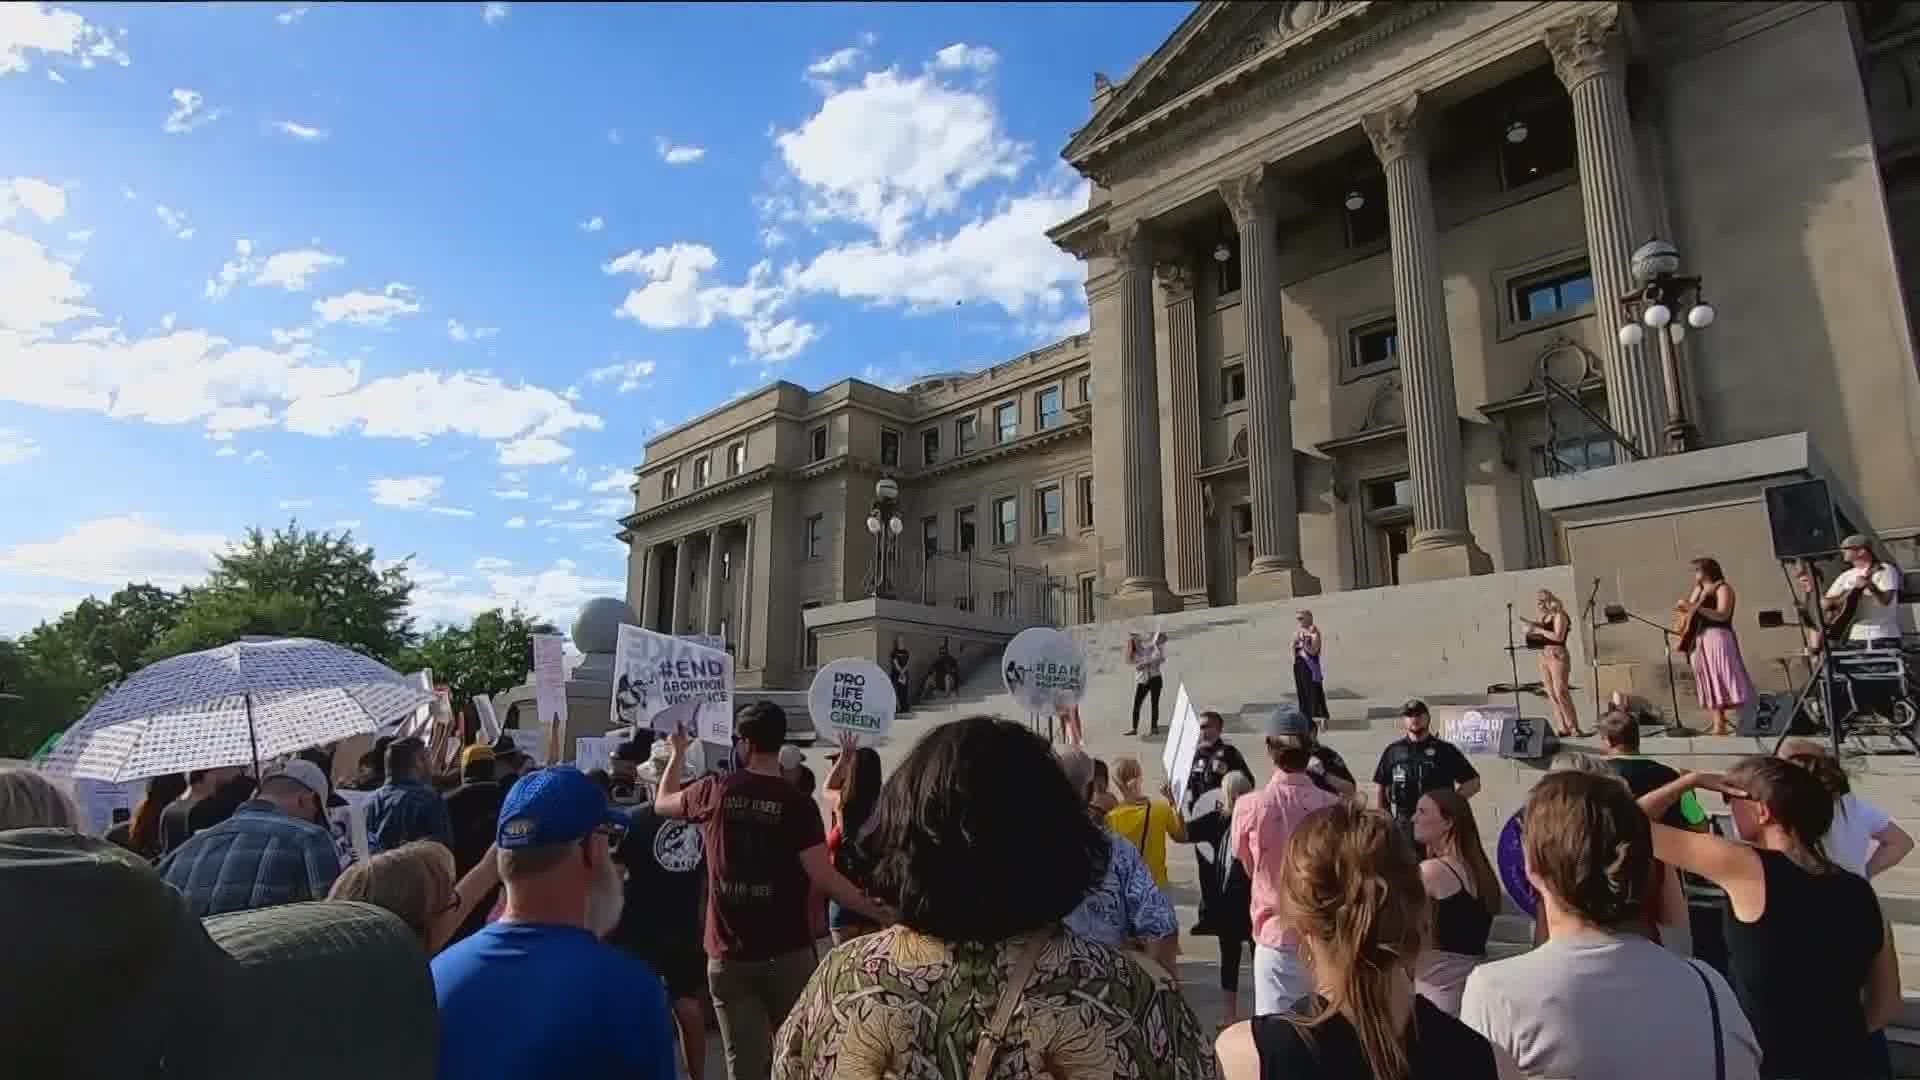 More than 200 people on both sides of the abortion debate gathered at the Idaho Capitol Steps Tuesday evening.